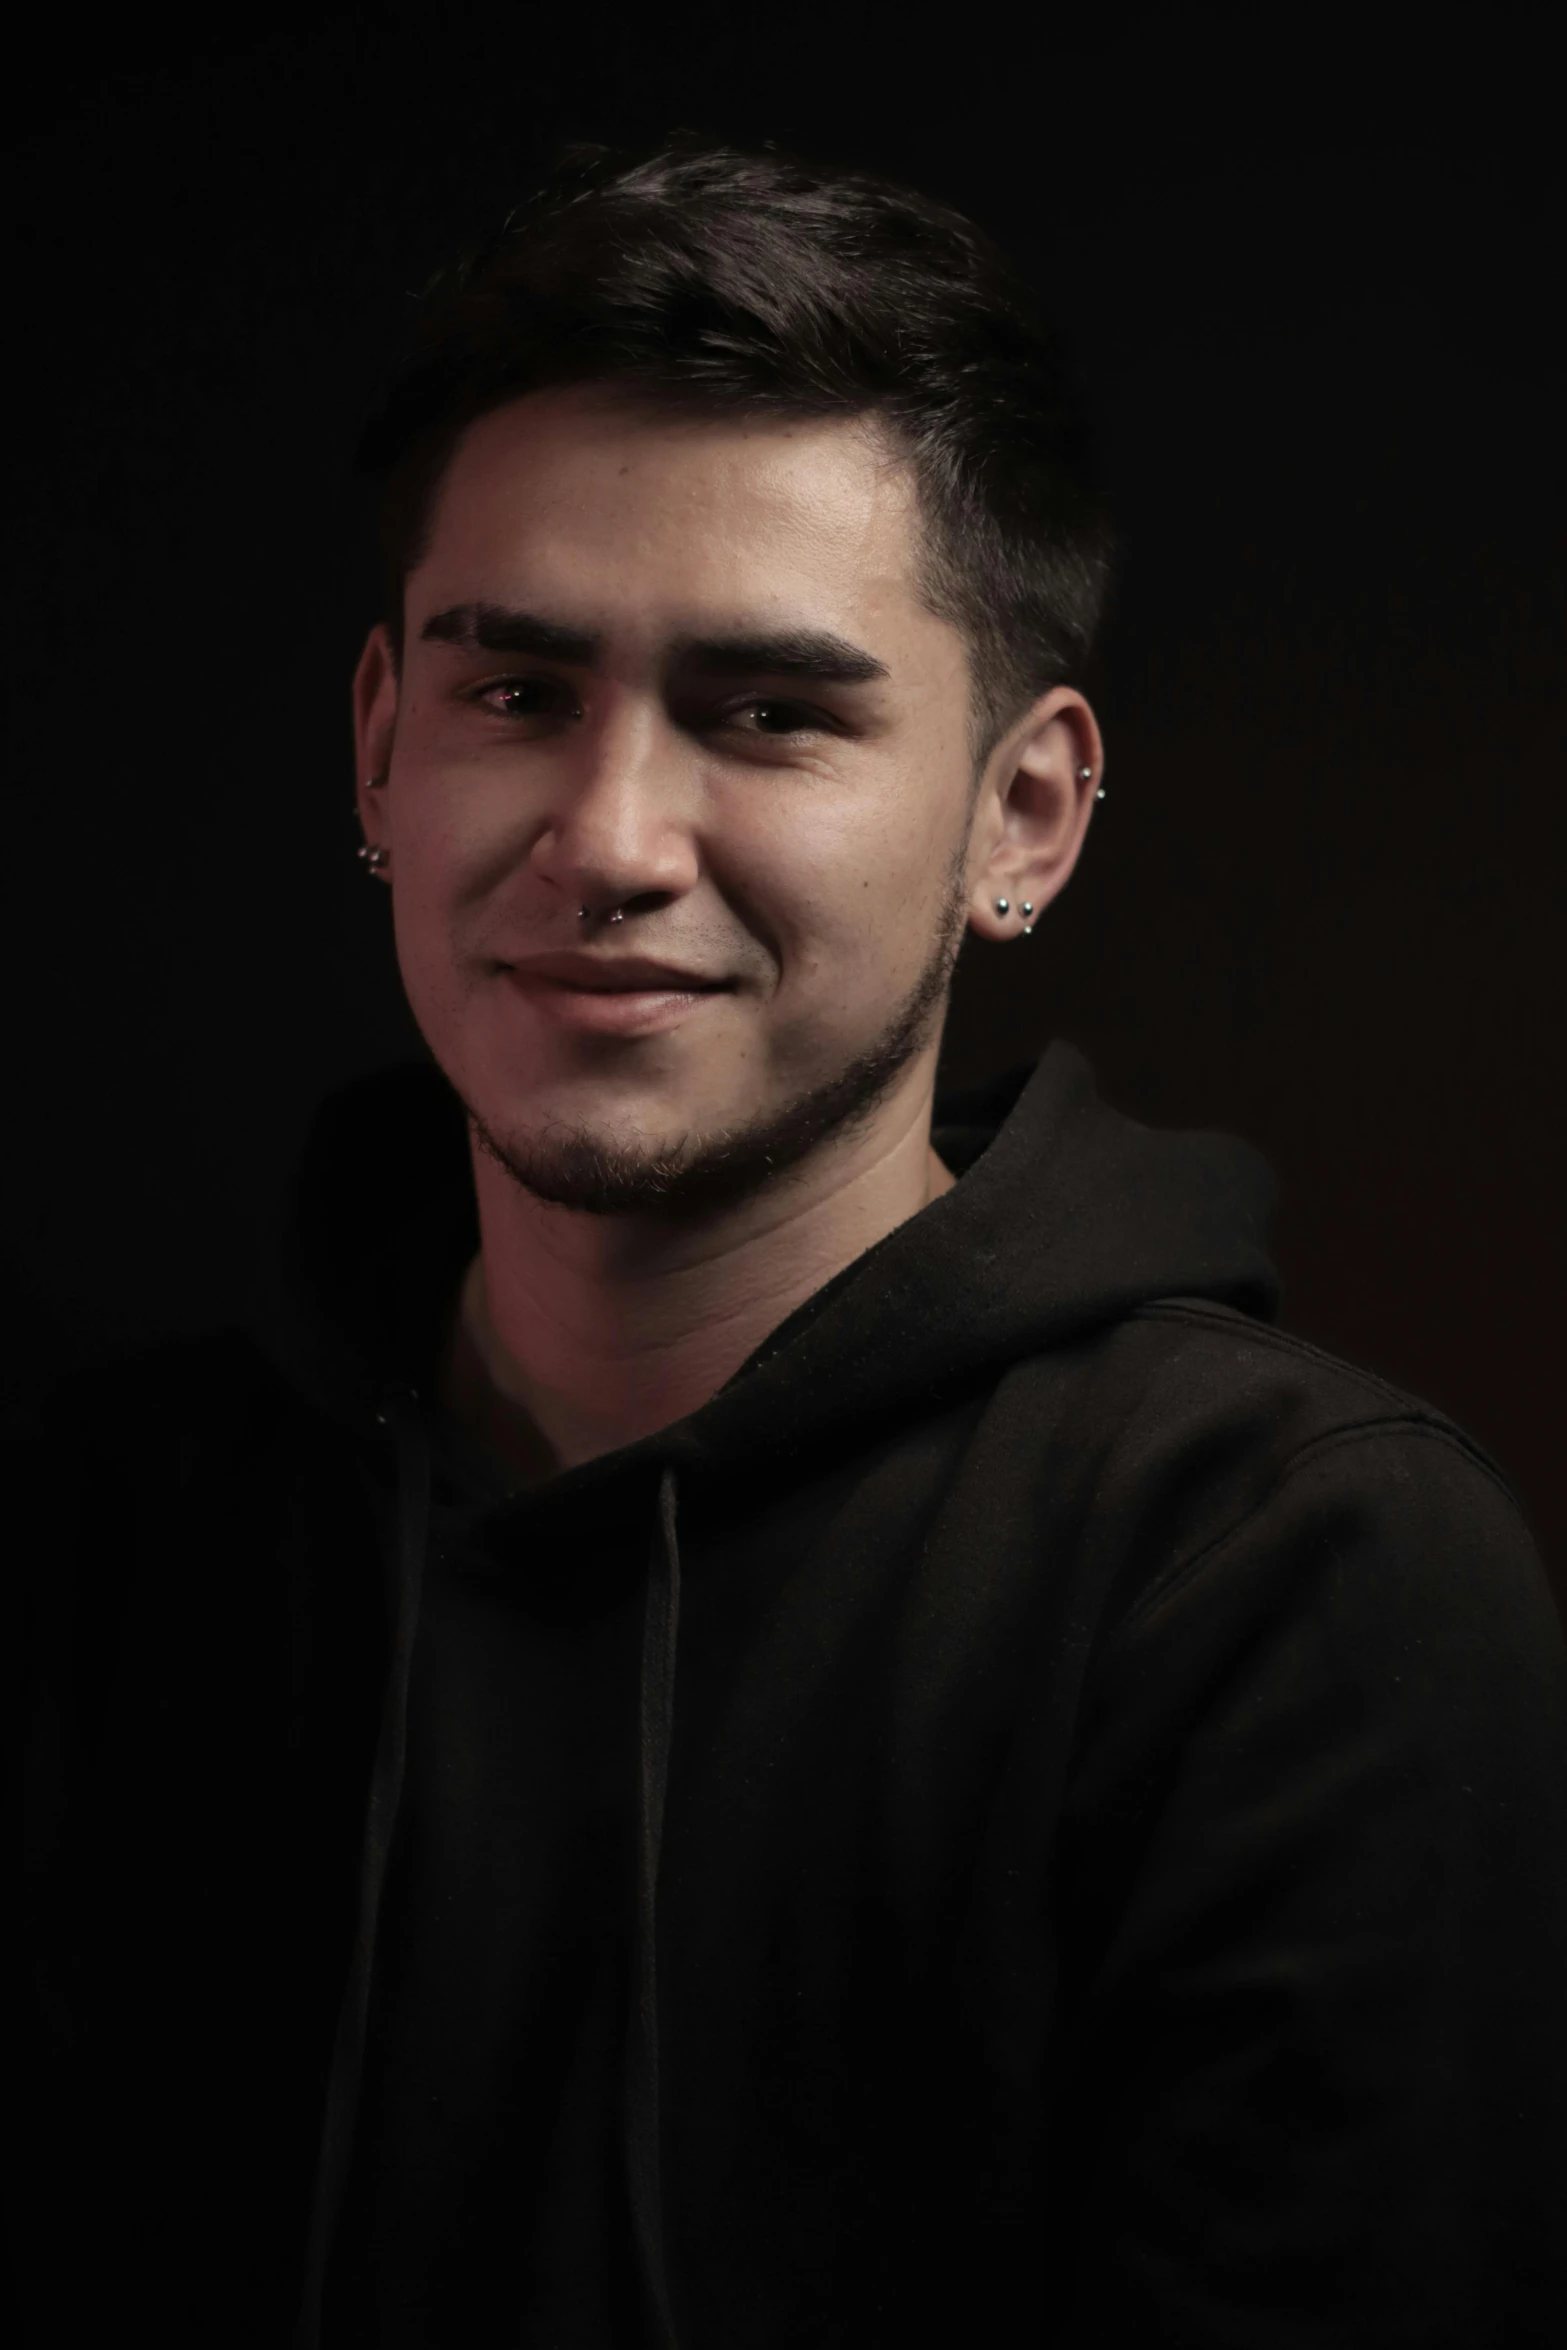 a male with a black shirt and ear piercings